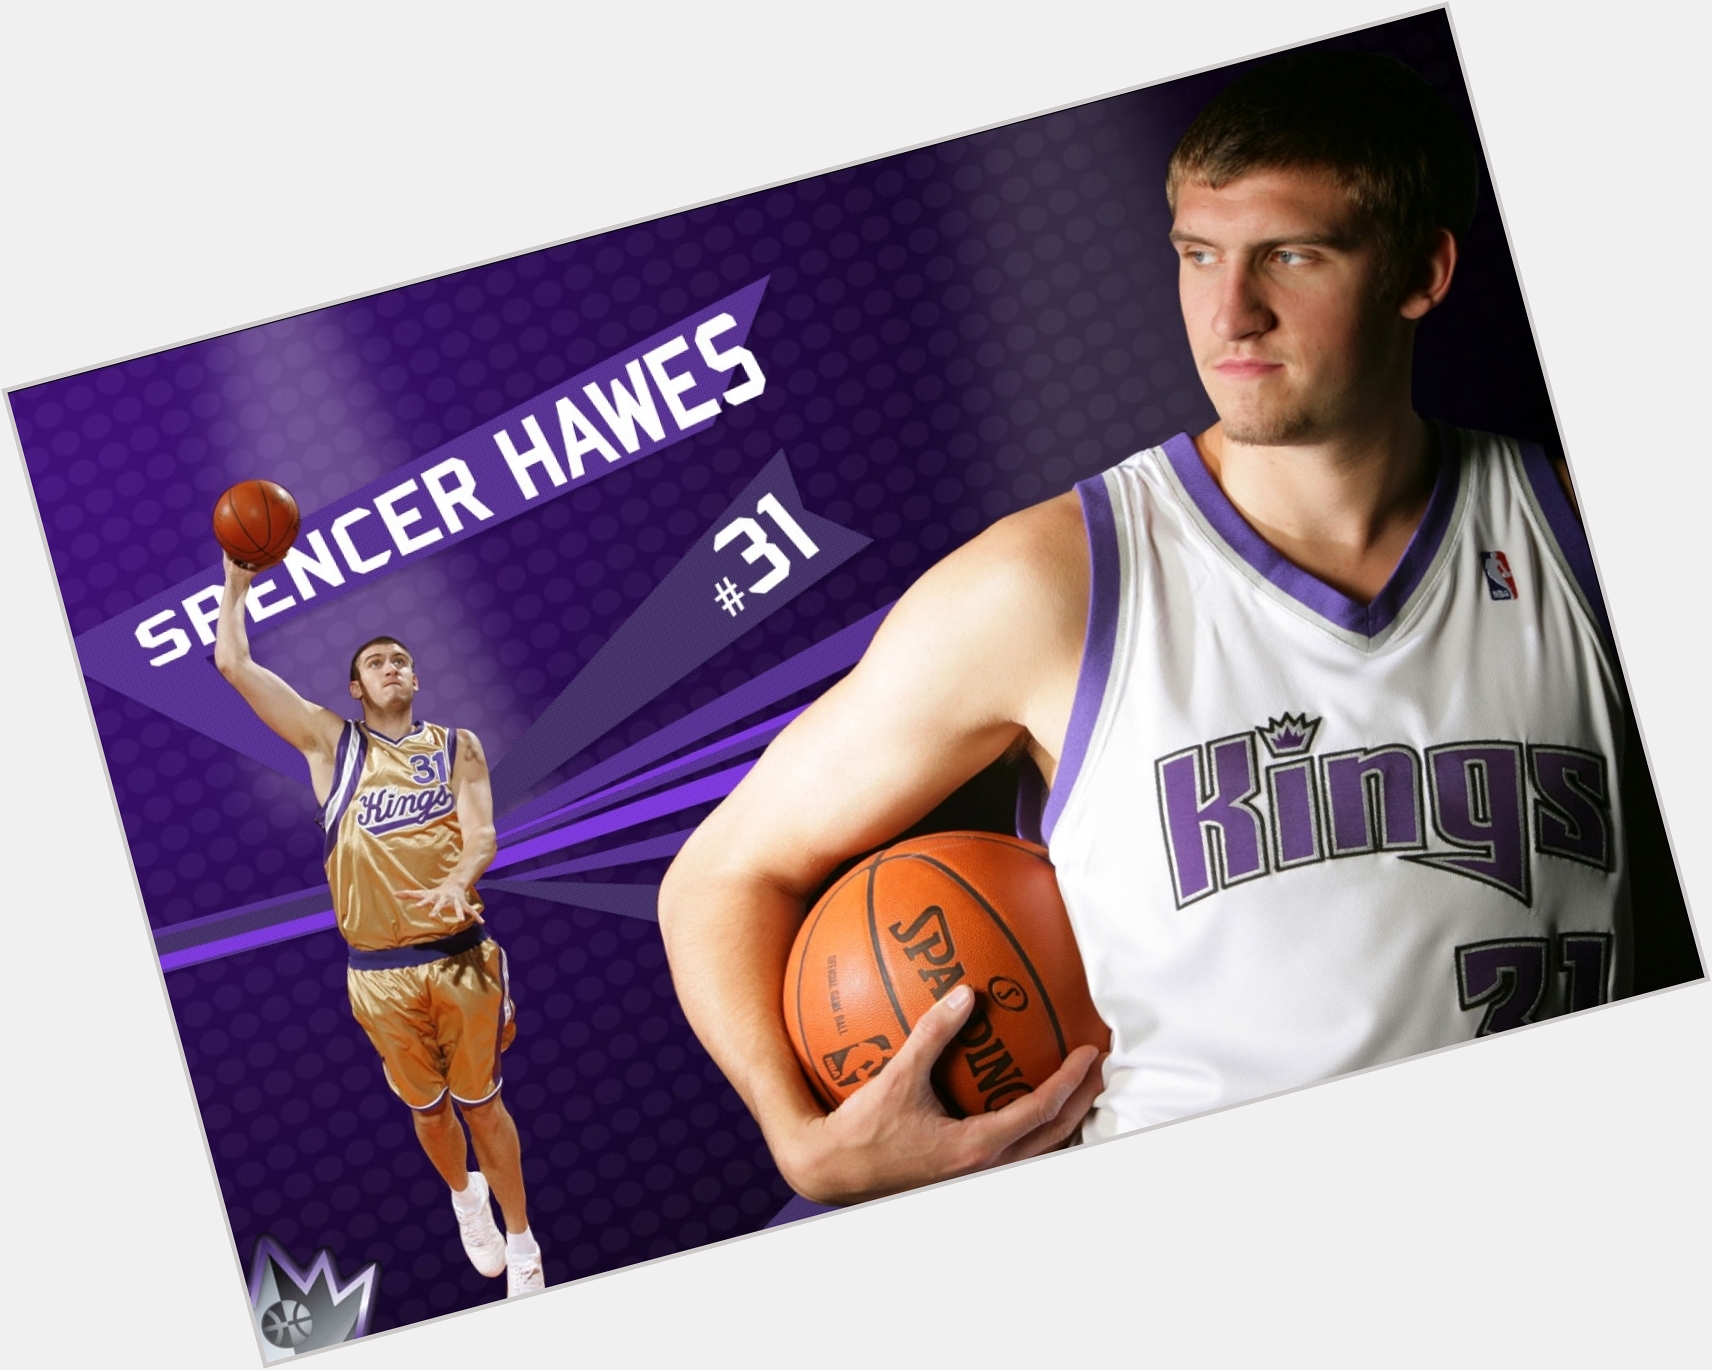 Https://fanpagepress.net/m/S/Spencer Hawes Dating 2